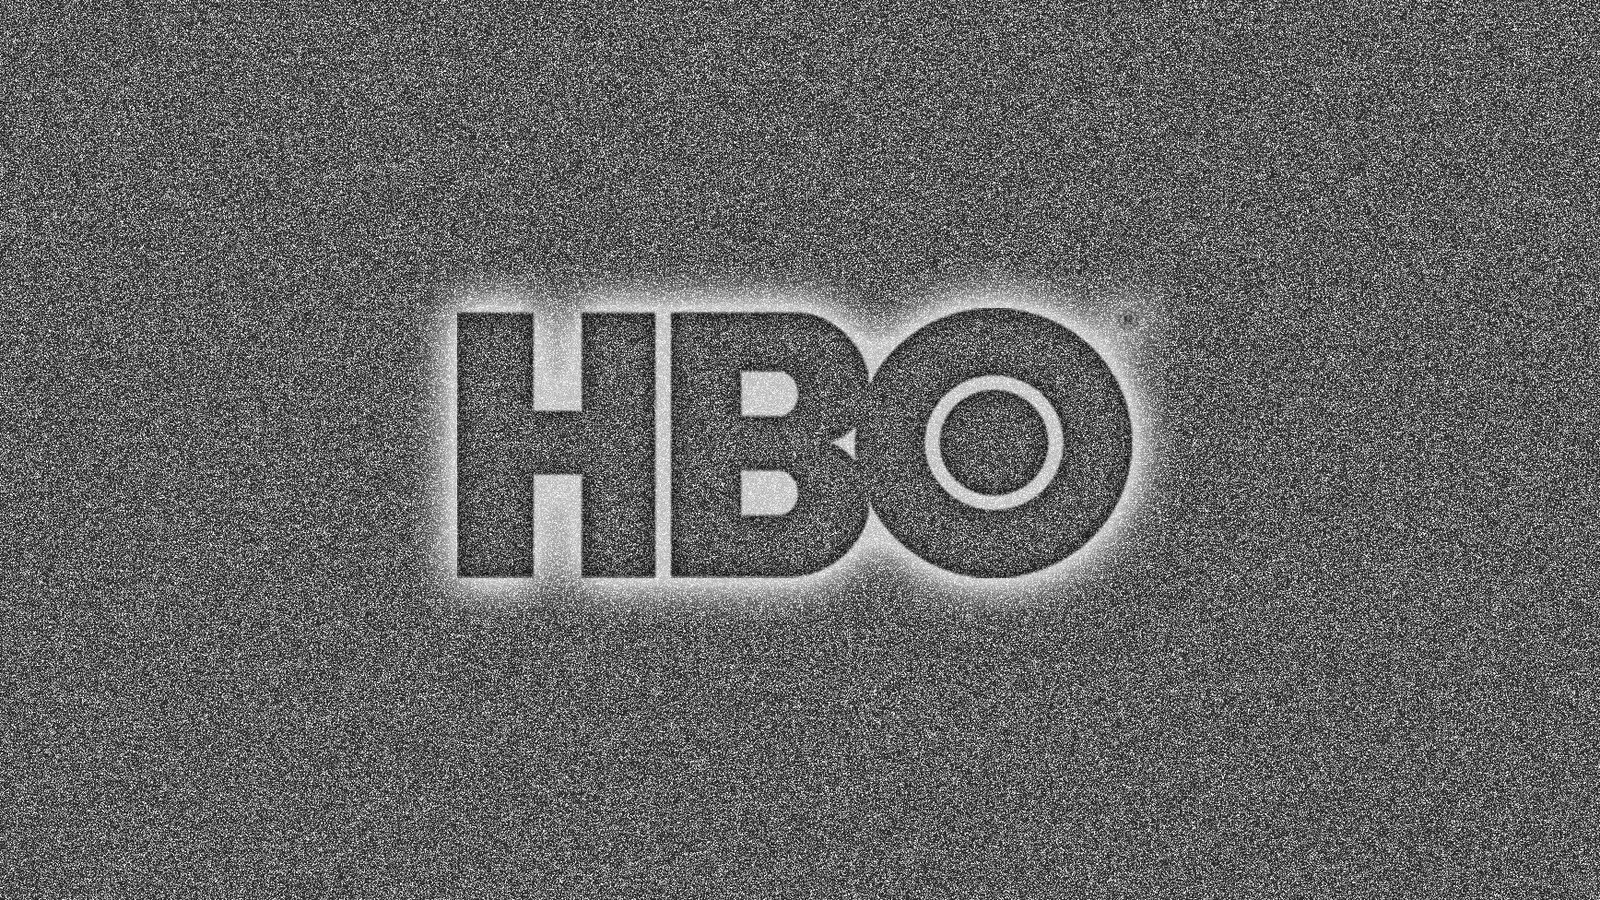 Warner Bros. Discovery "doubles" on HBO, but what about HBO Max?